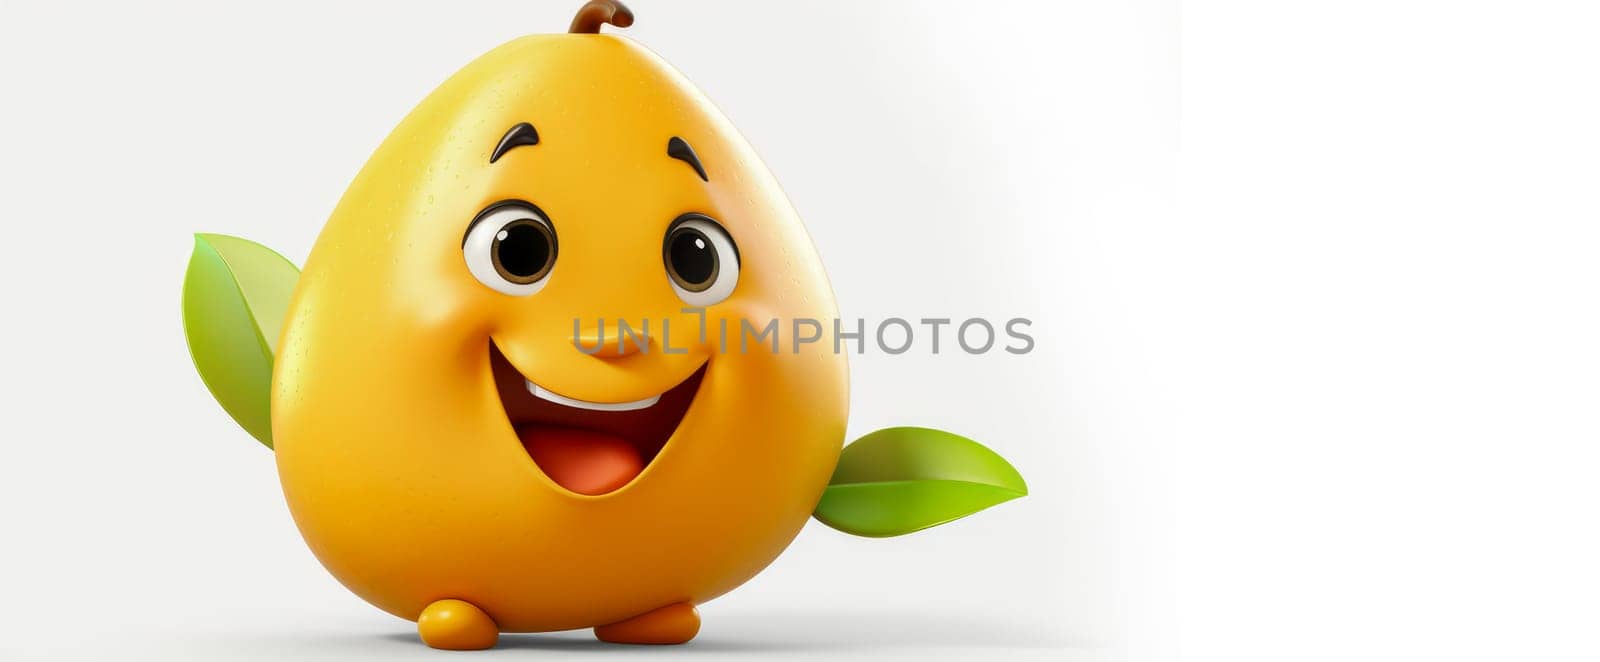 Orange mango with a cheerful face 3D on a white background. Cartoon characters, three-dimensional character, healthy lifestyle, proper nutrition, diet, fresh vegetables and fruits, vegetarianism, veganism, food, breakfast, fun, laughter, banner